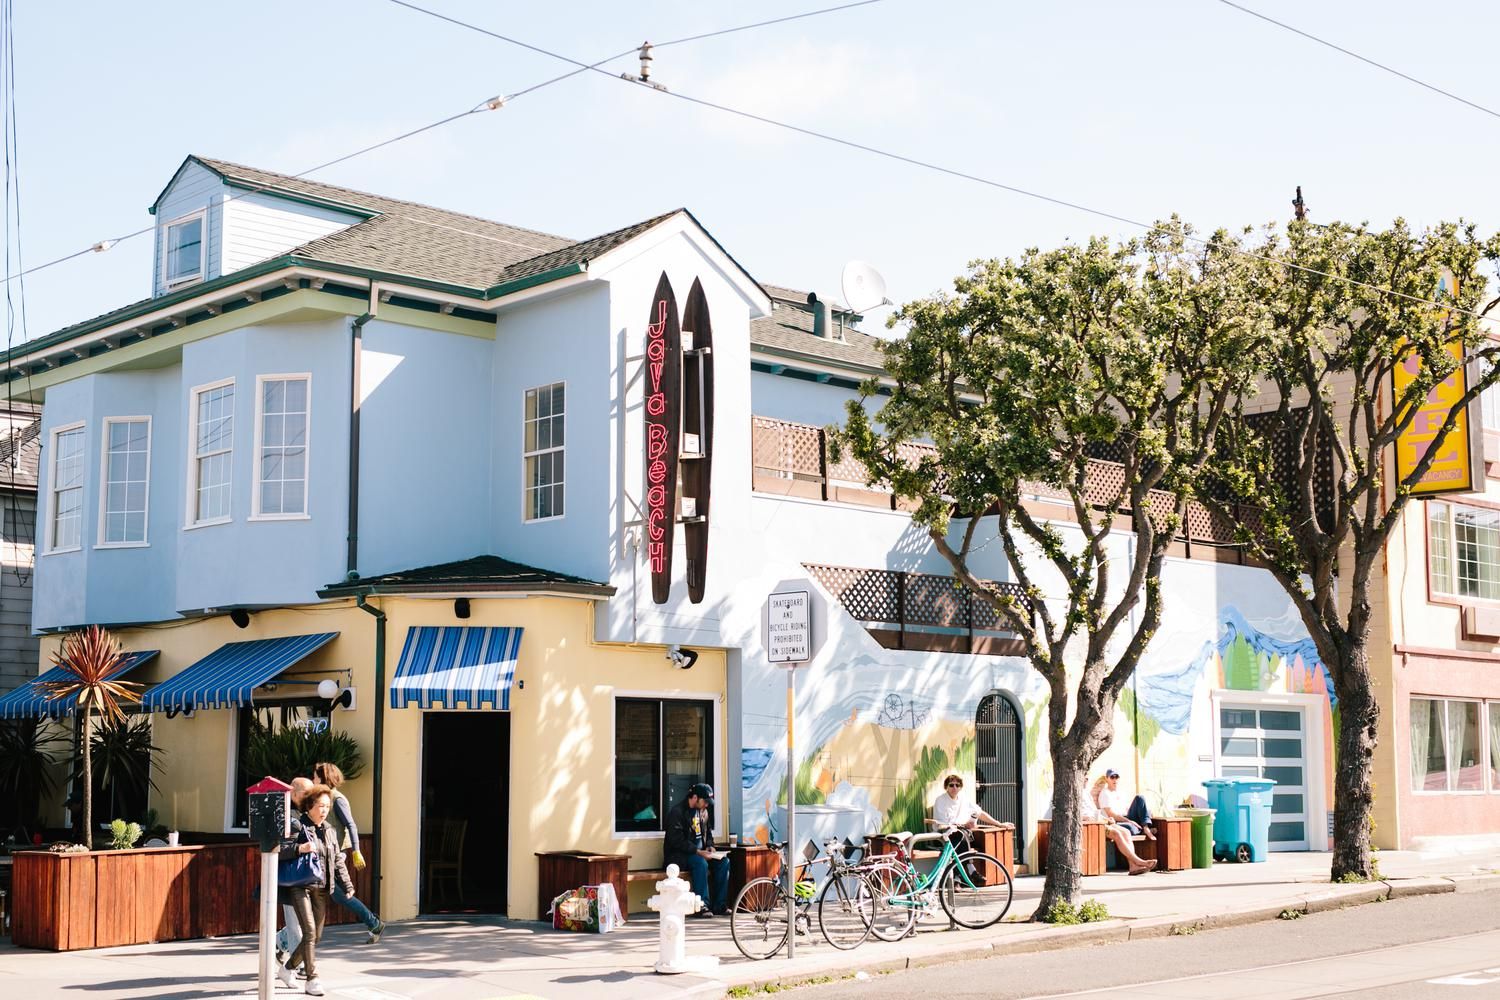 Modern Guide to the Outer Sunset: Craft Goods, Cult Brunch, and Hip Cafes Near Ocean Beach